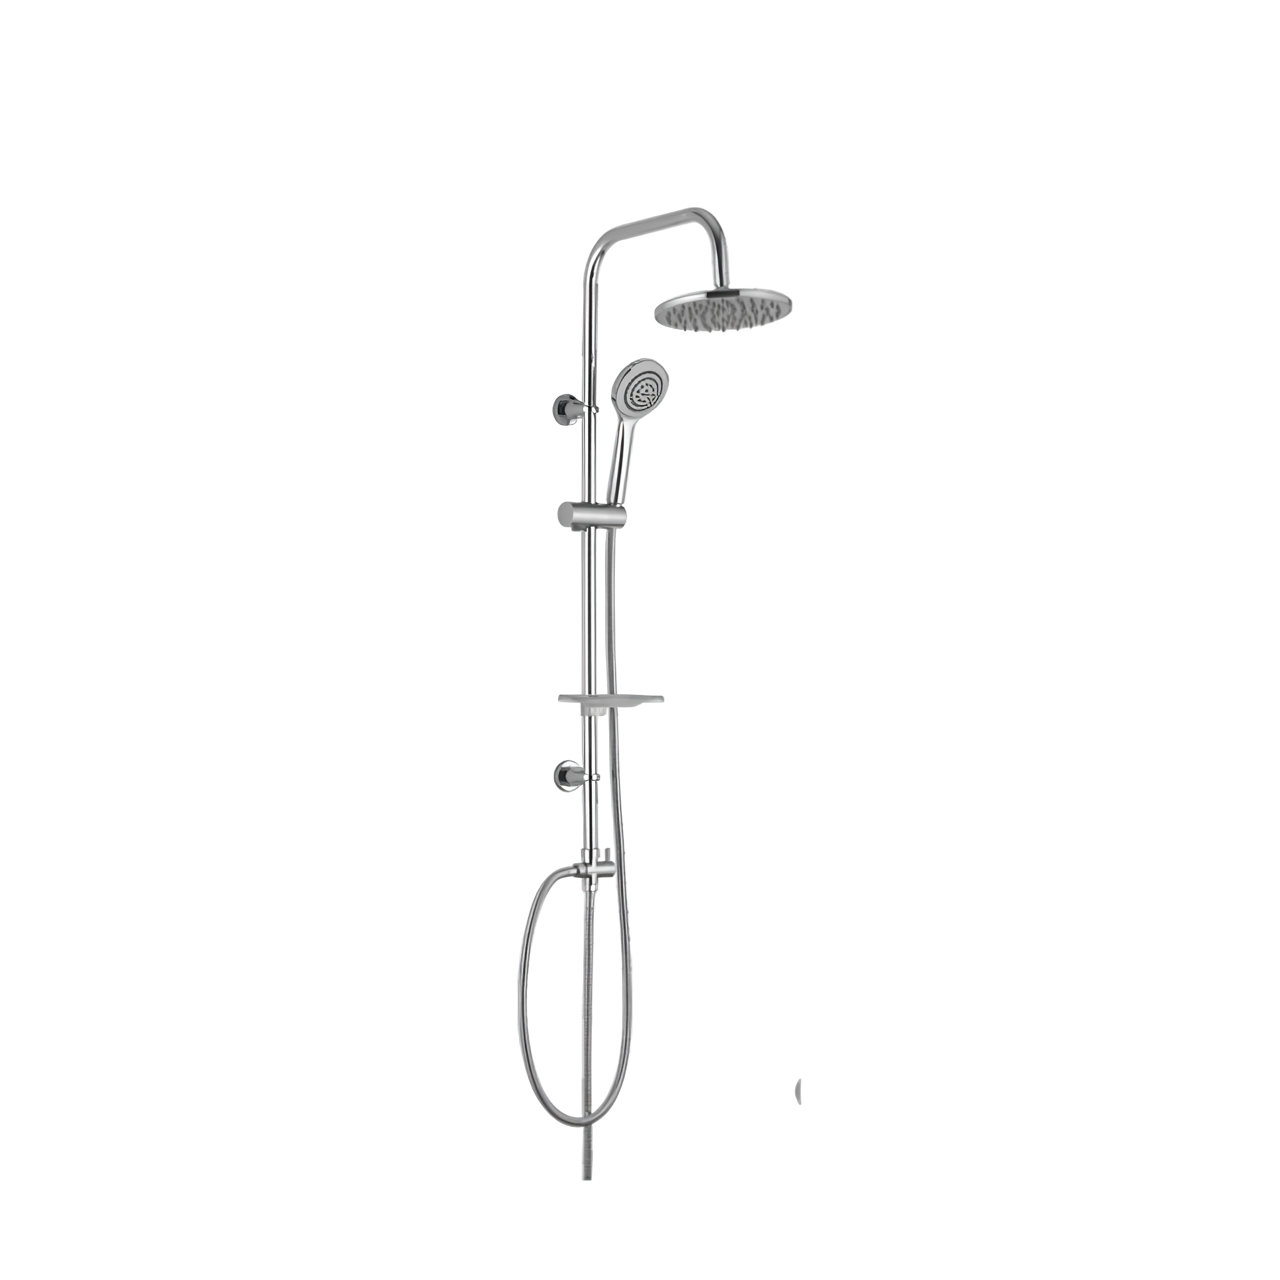 L715C Round Rainfall Shower Head and Handheld Showerhead Combo Shower System with Slide Bar Shower Set